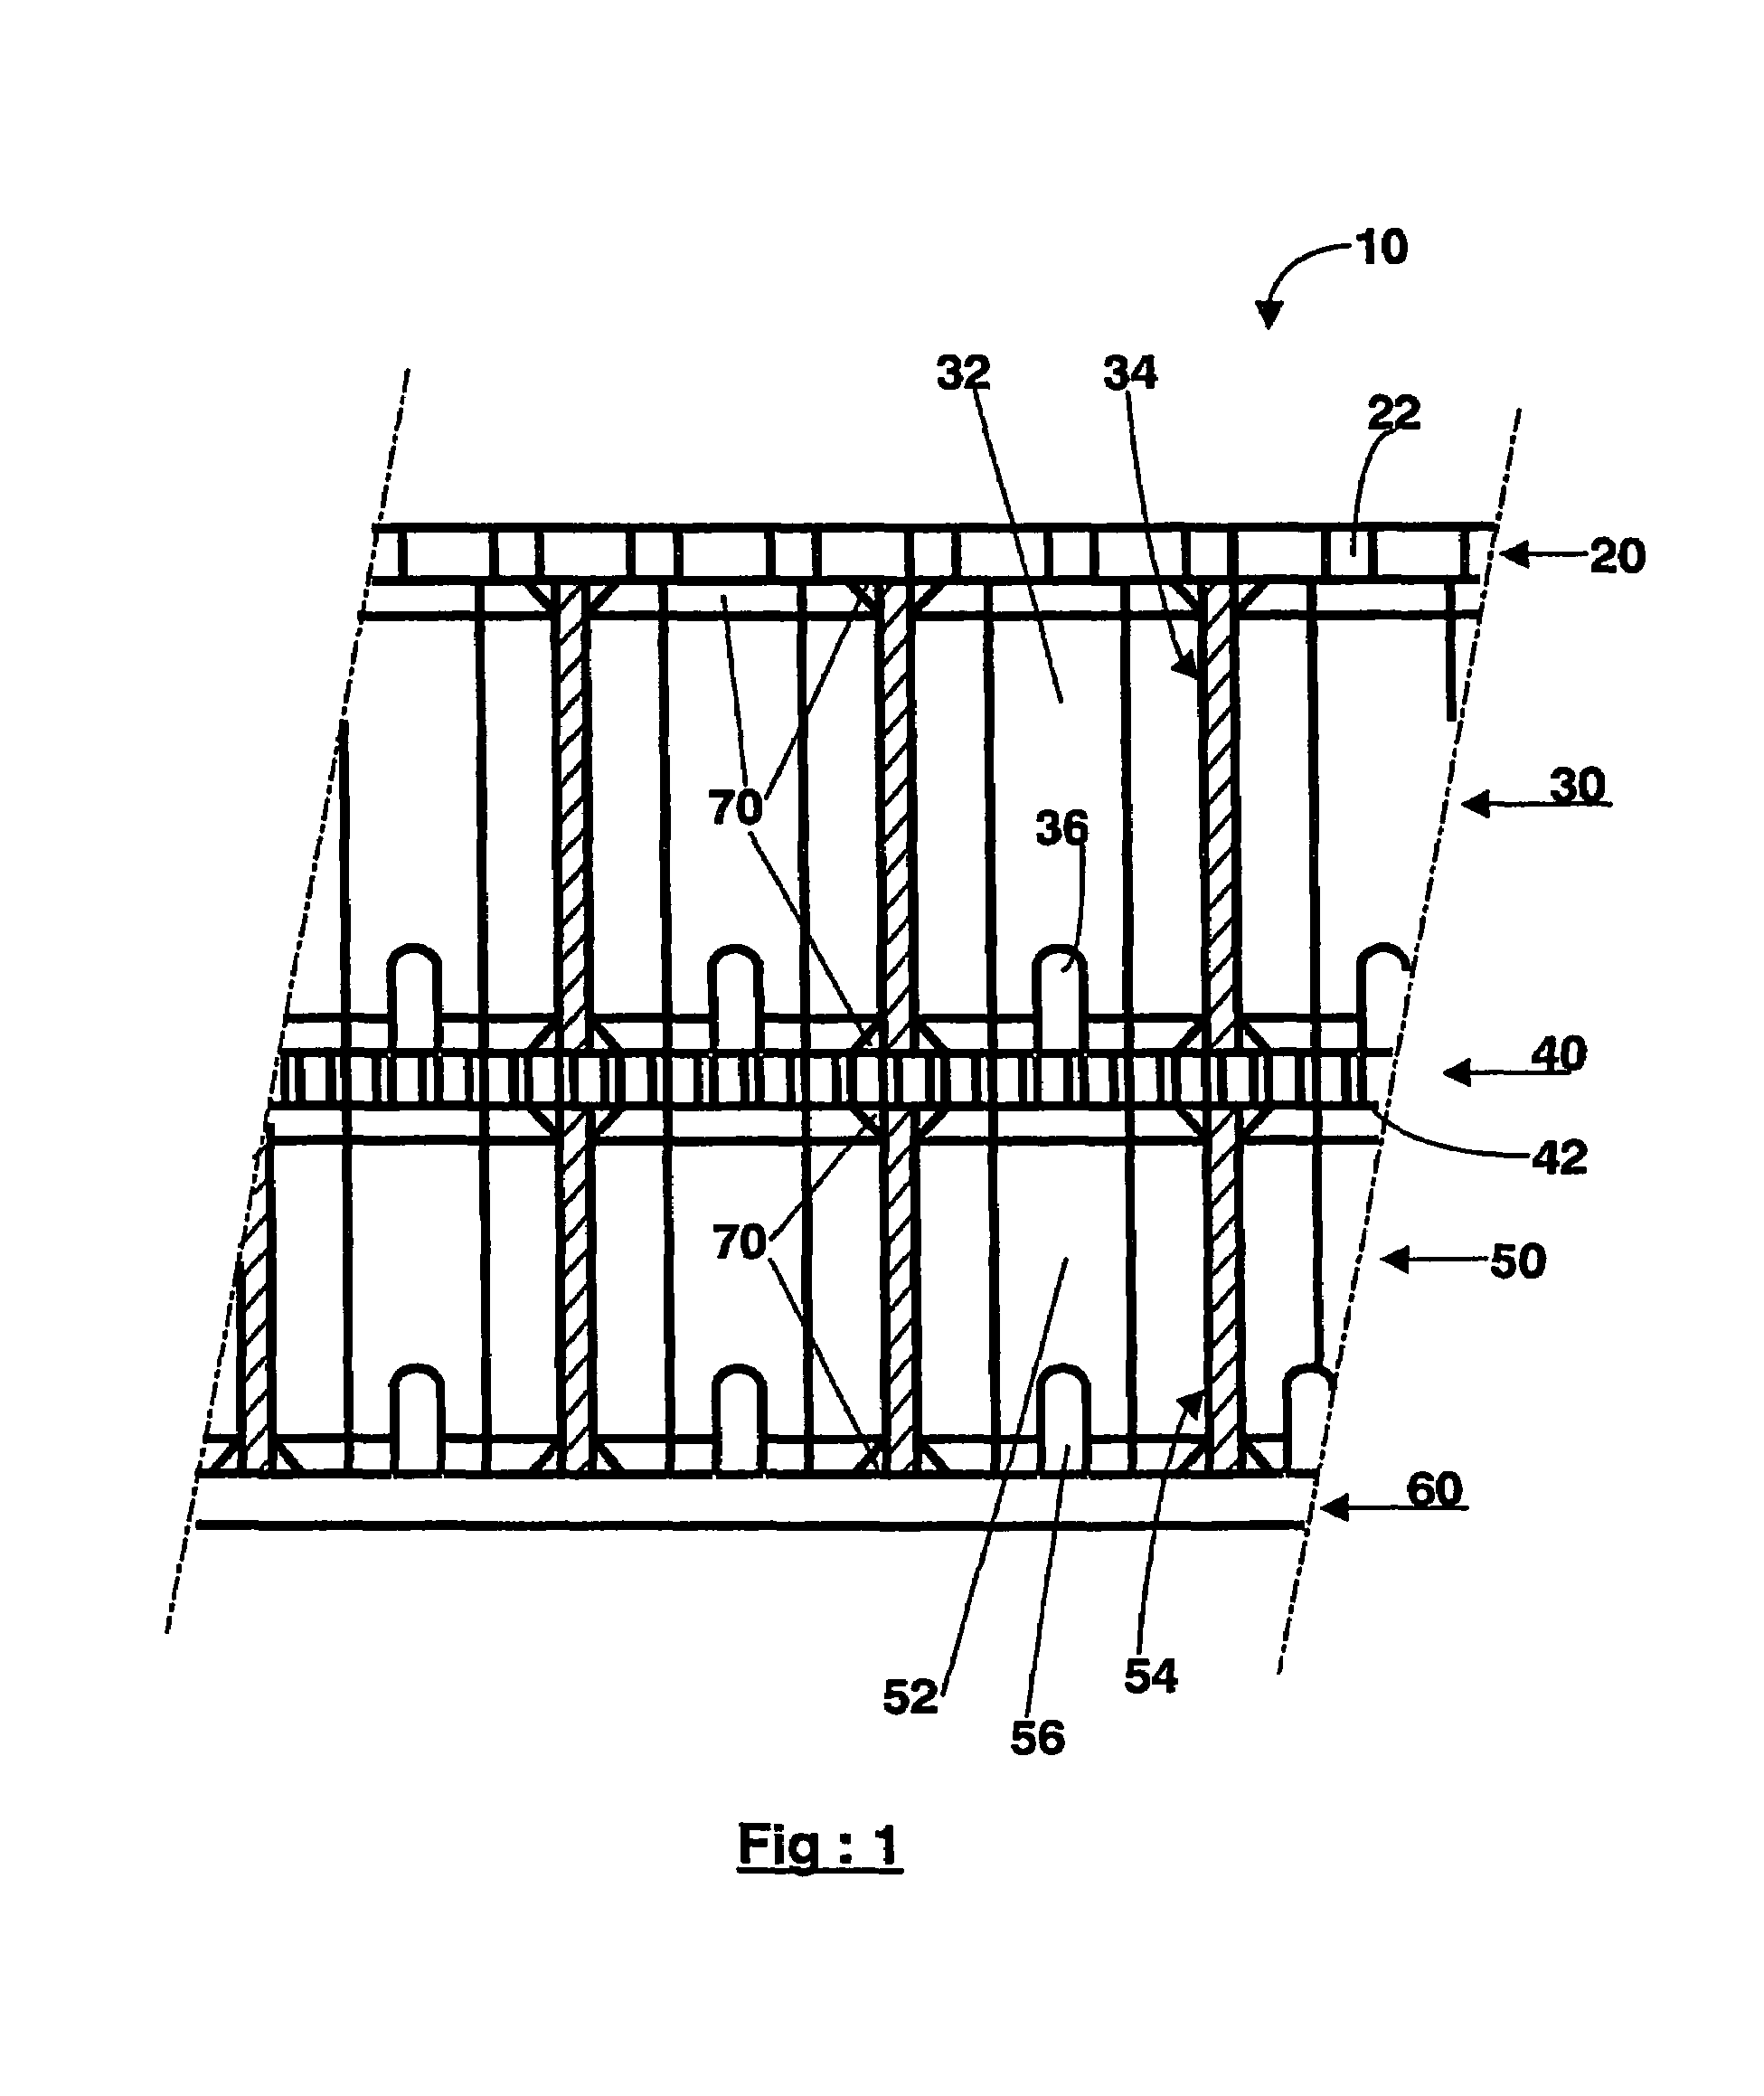 Method of assembling and monitoring an acoustic panel comprising a double resonator with a honeycomb core